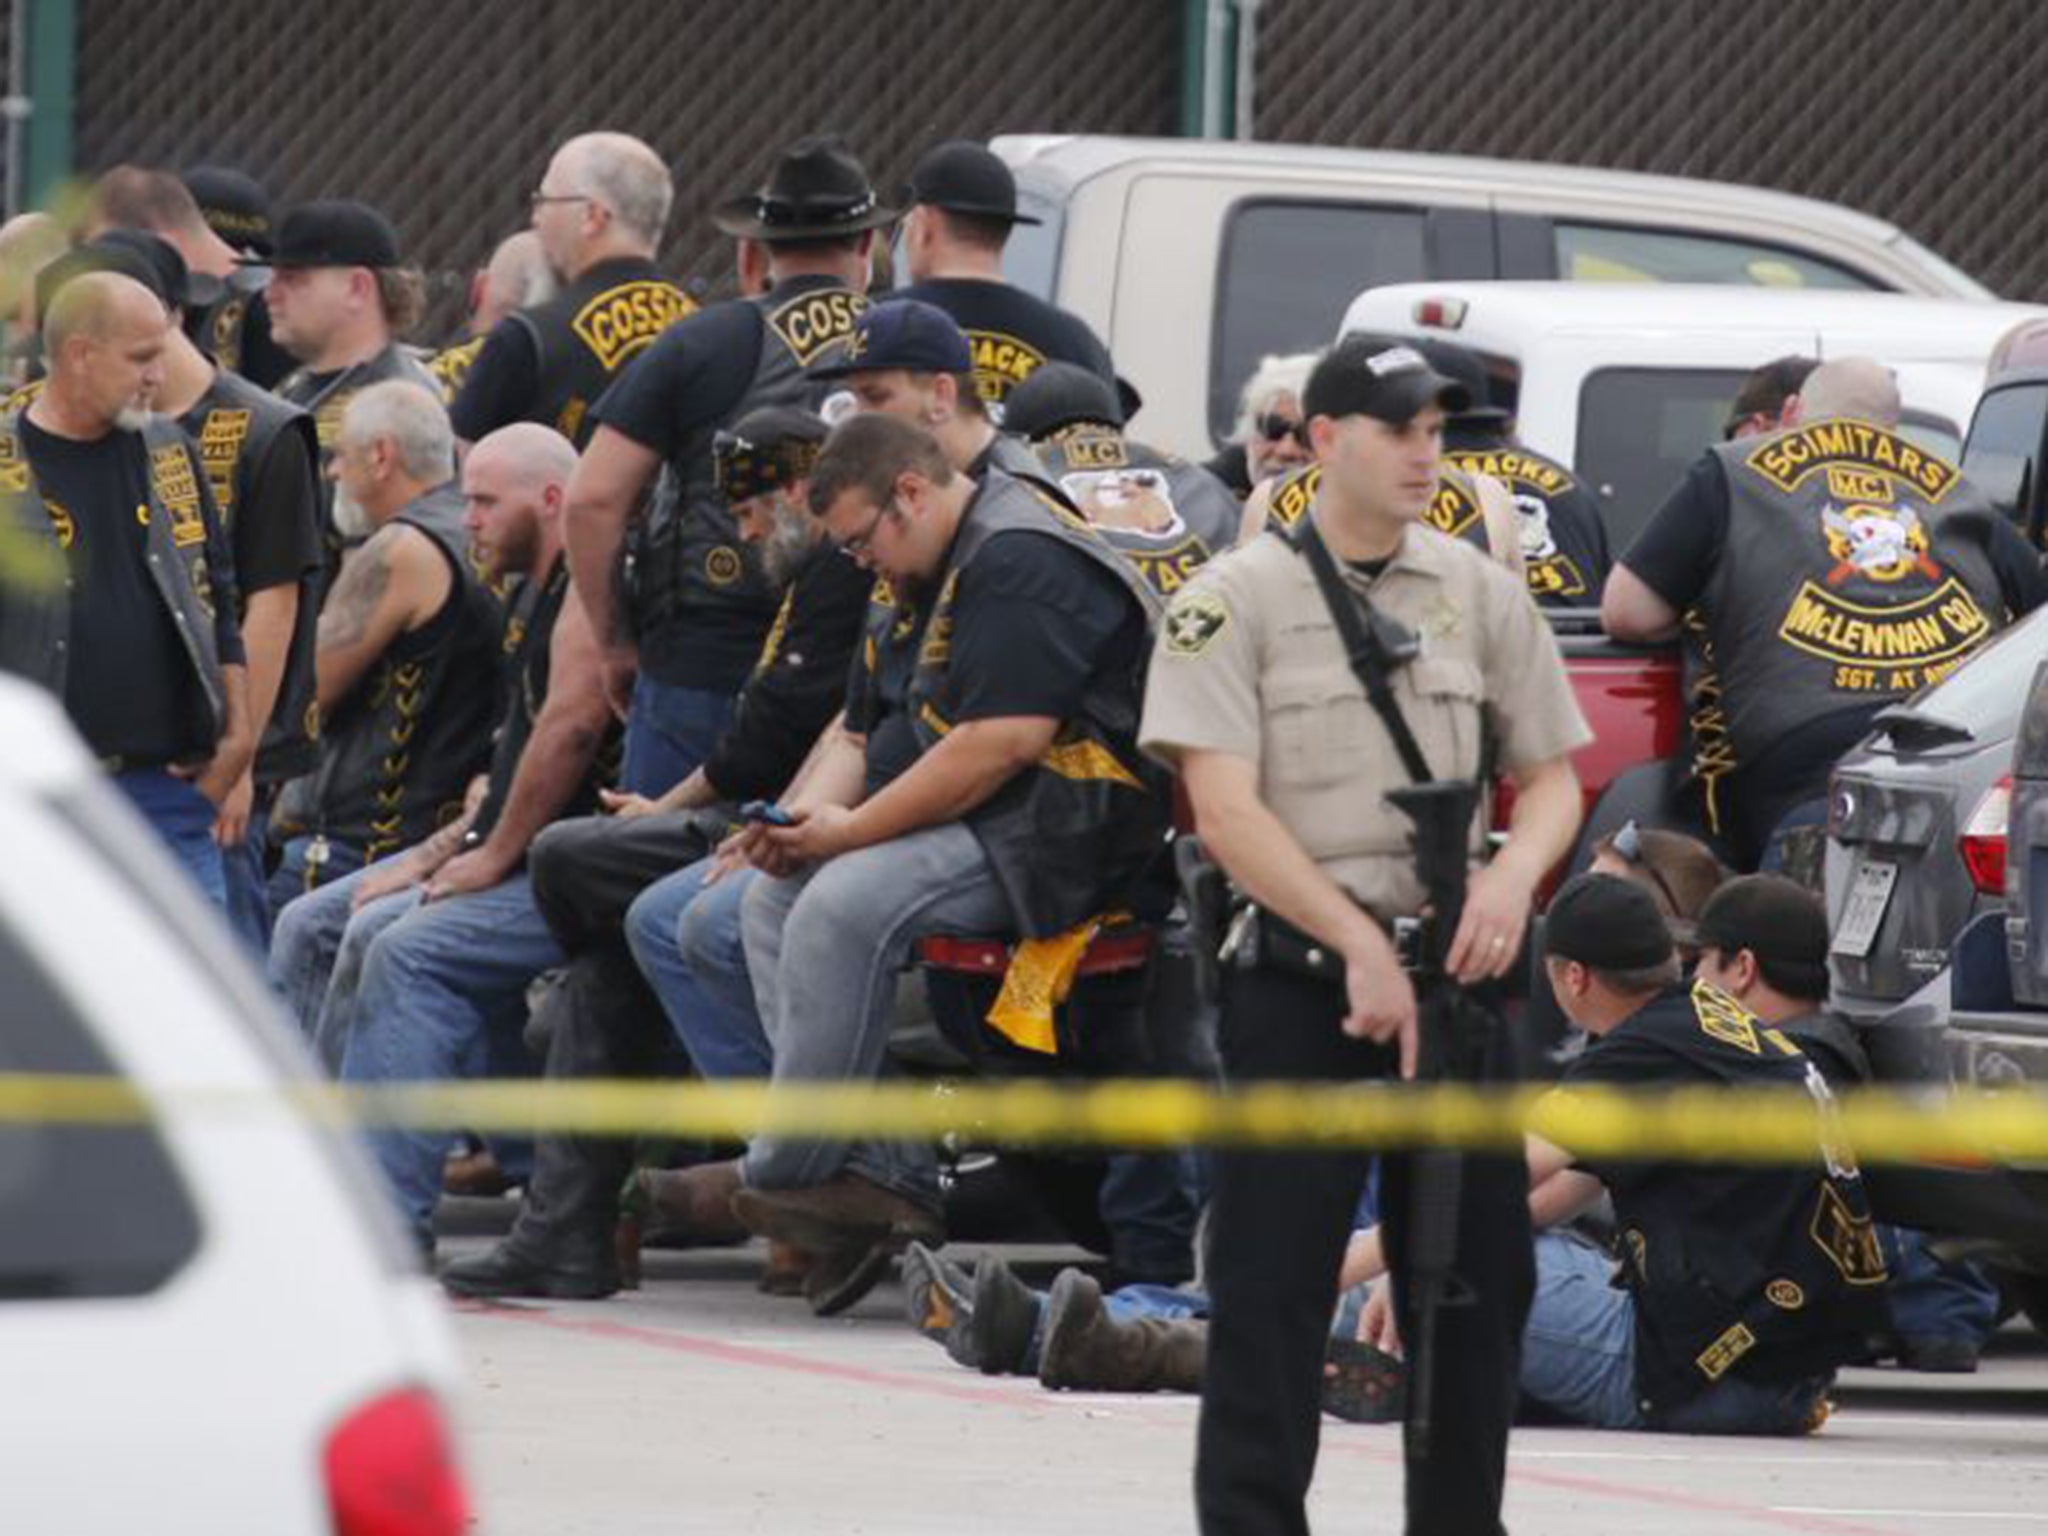 A police officer stands guard near a group of bikers in the parking lot of a bar after the deadly shootout on Sunday in Waco, Texas